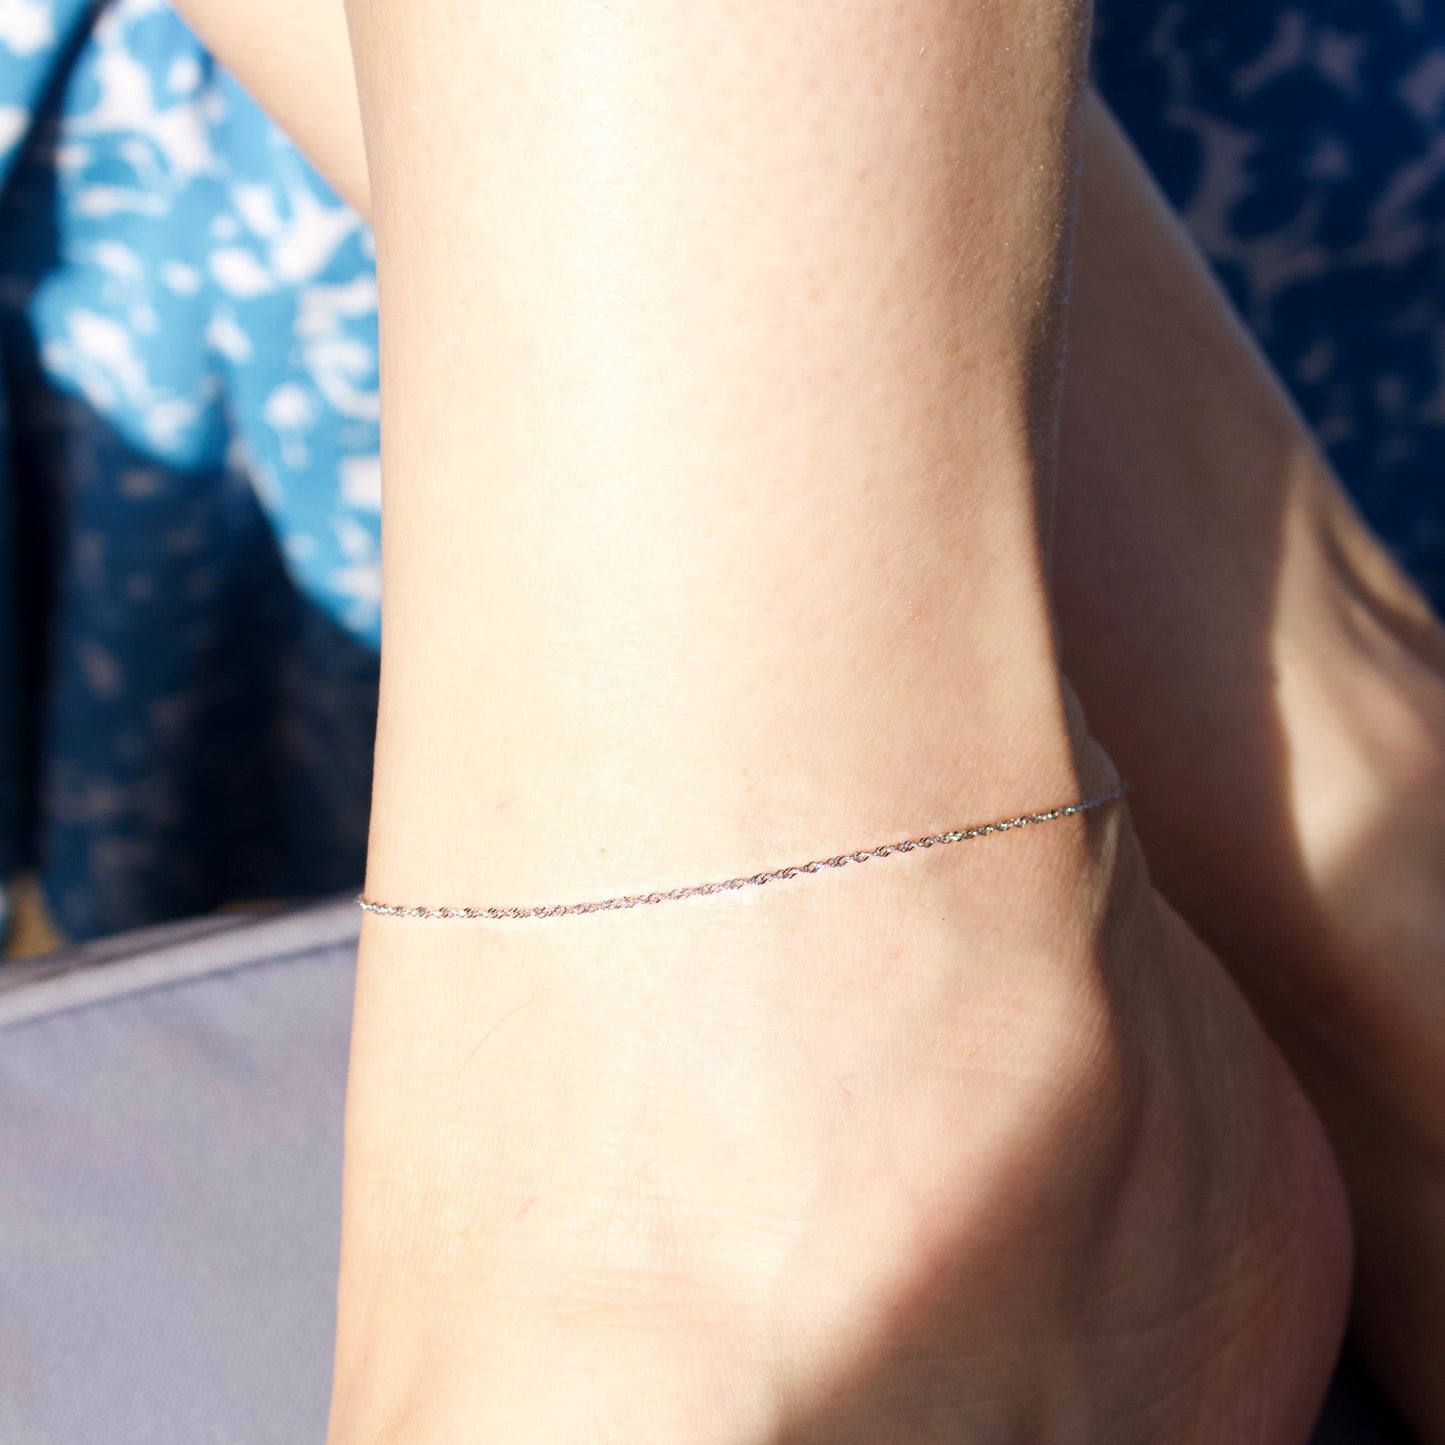 Singapore Chain Anklet